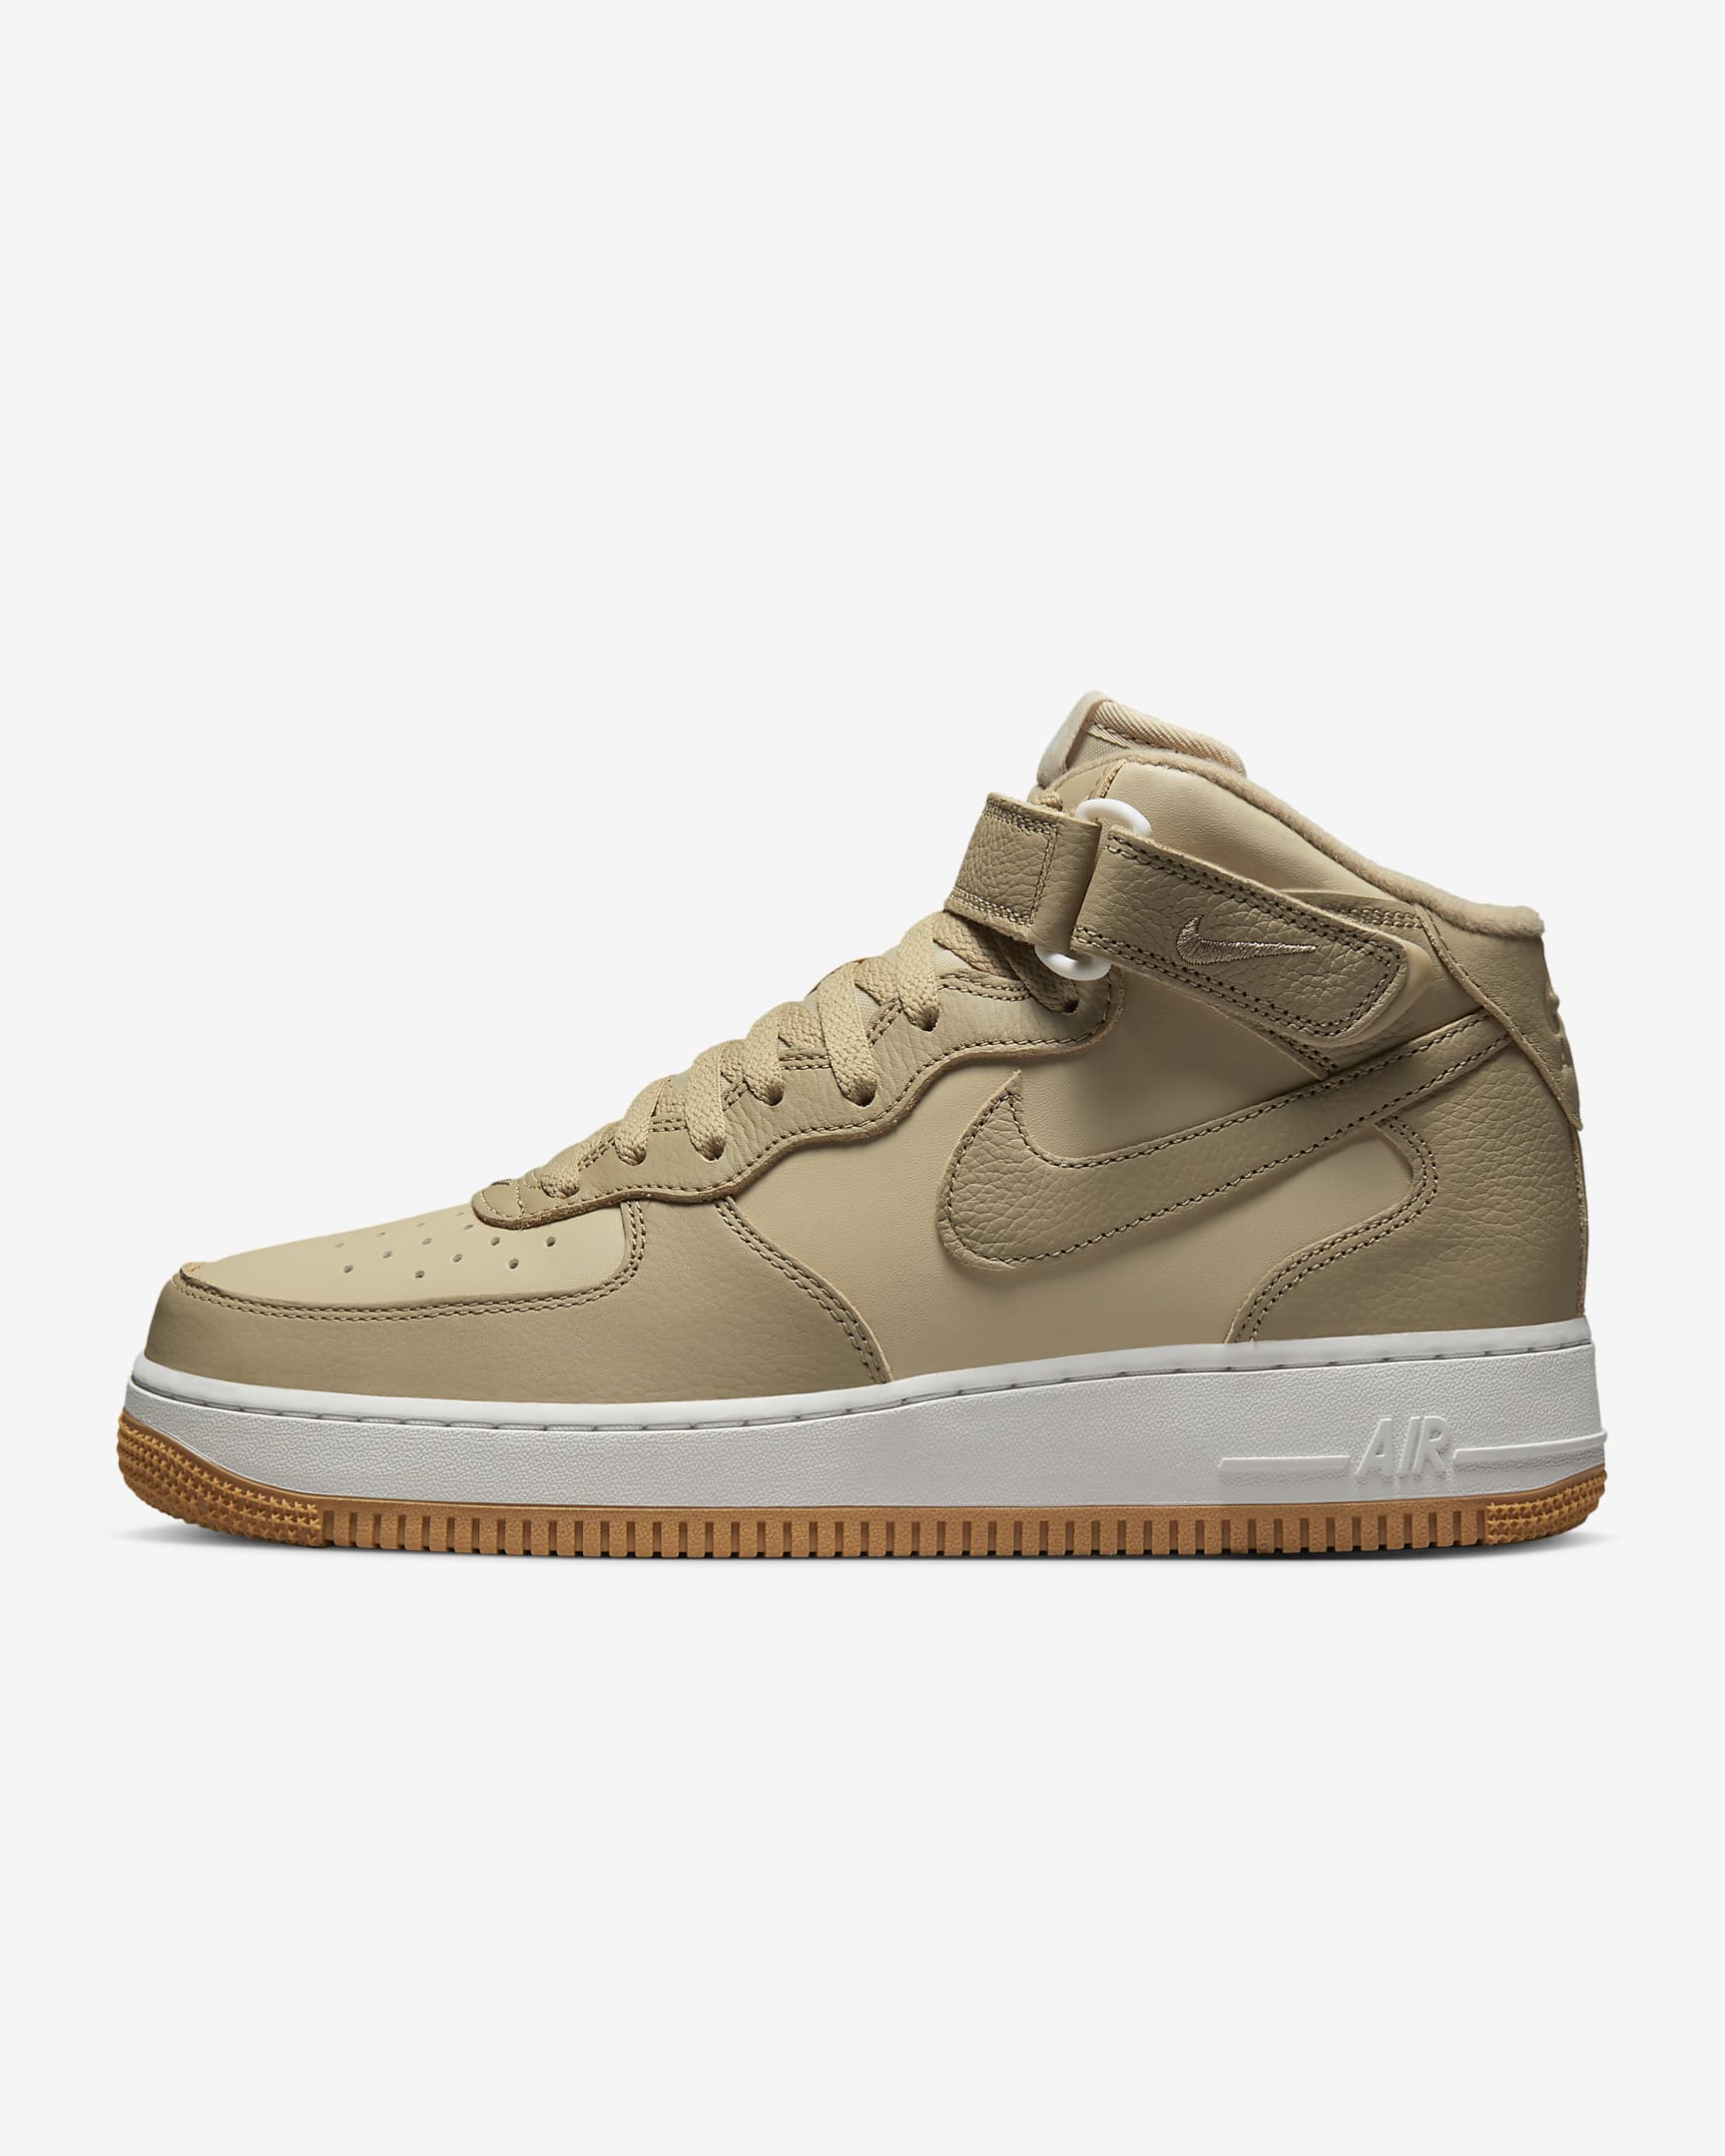 Nike Air Force 1 Mid '07 LX Men's Shoes. Nike IL